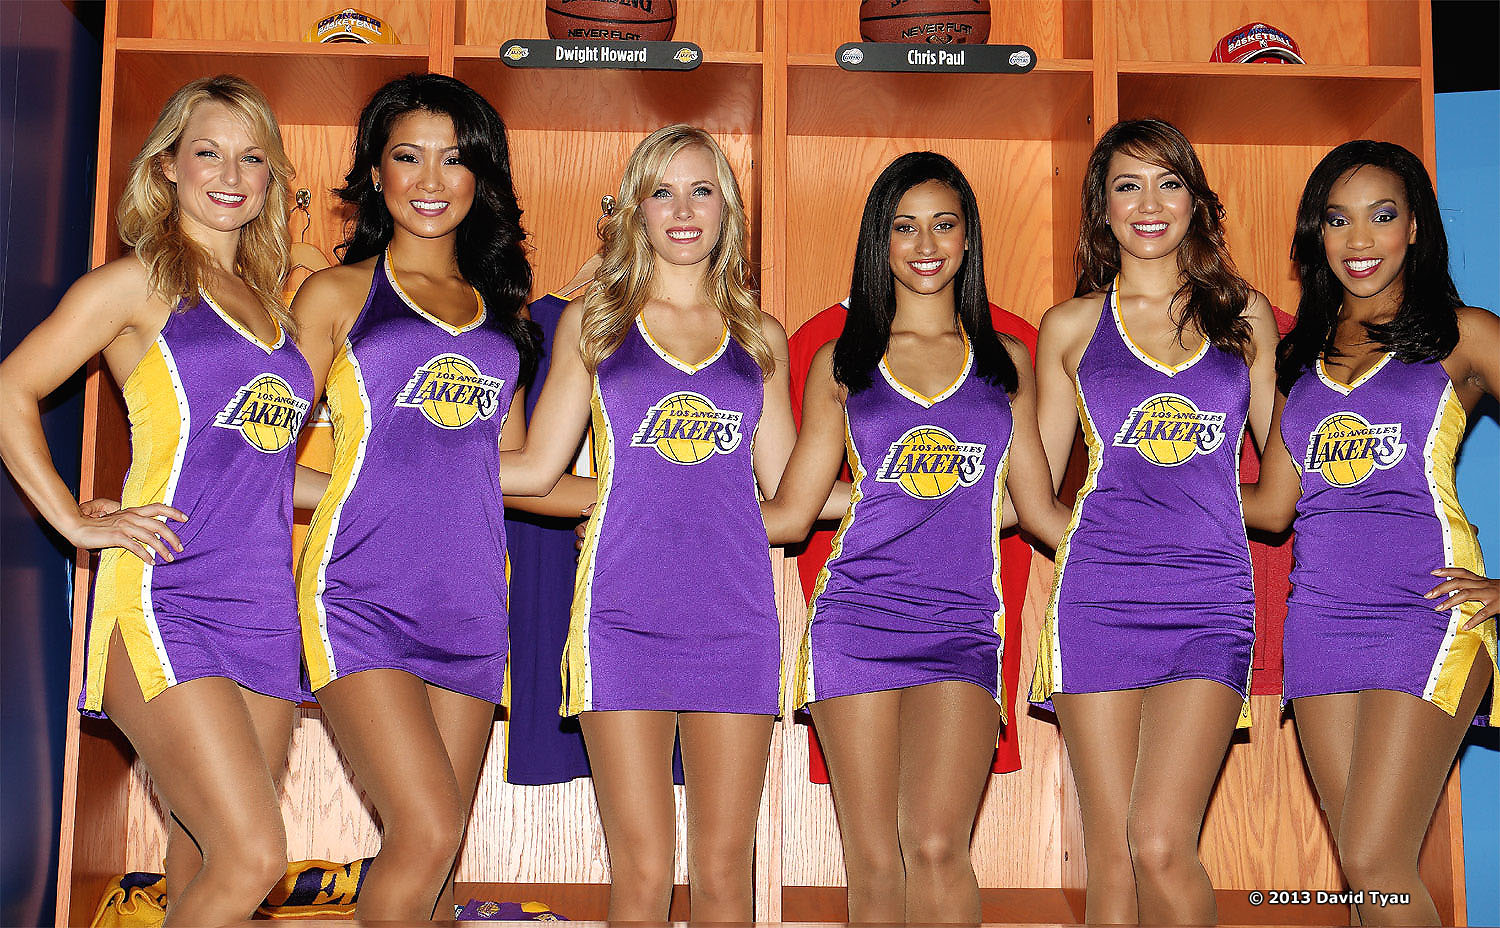 The Laker Girls At Nba Nation Tour Hottest Dance Team